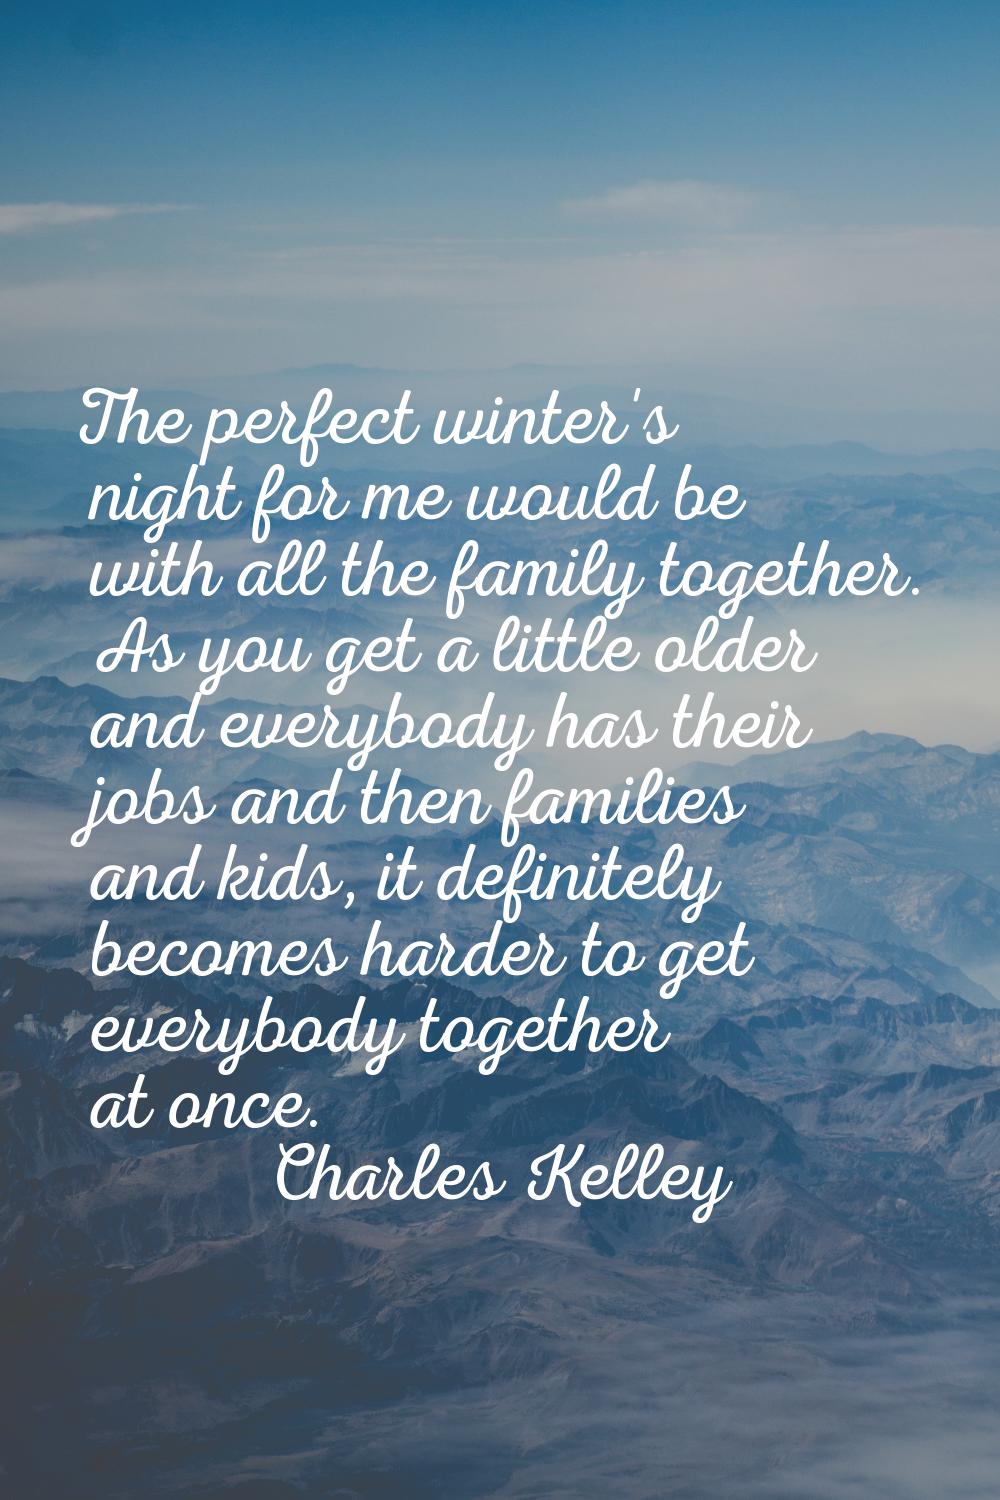 The perfect winter's night for me would be with all the family together. As you get a little older 